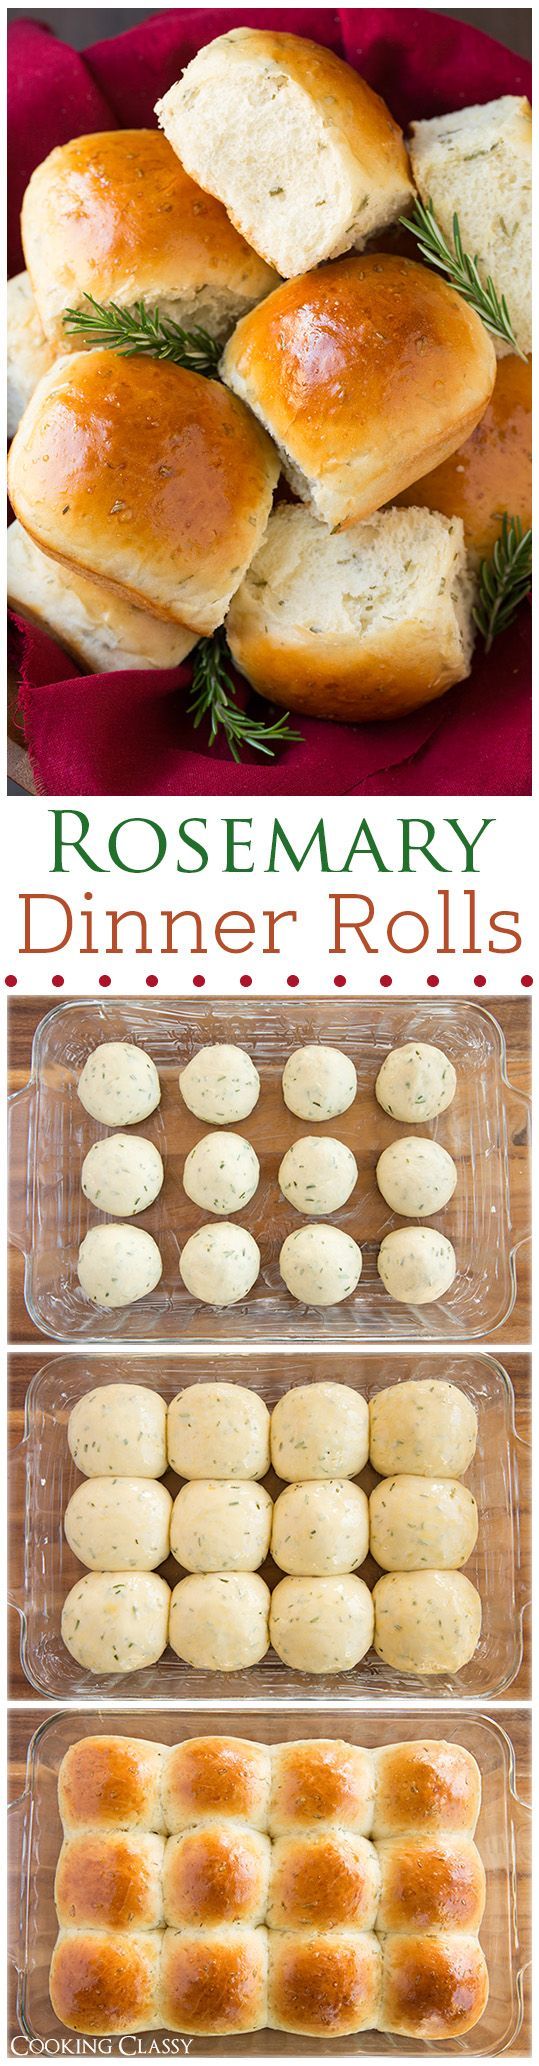 Rosemary Dinner Rolls – These rolls are heavenly! Light and fluffy and full of fre